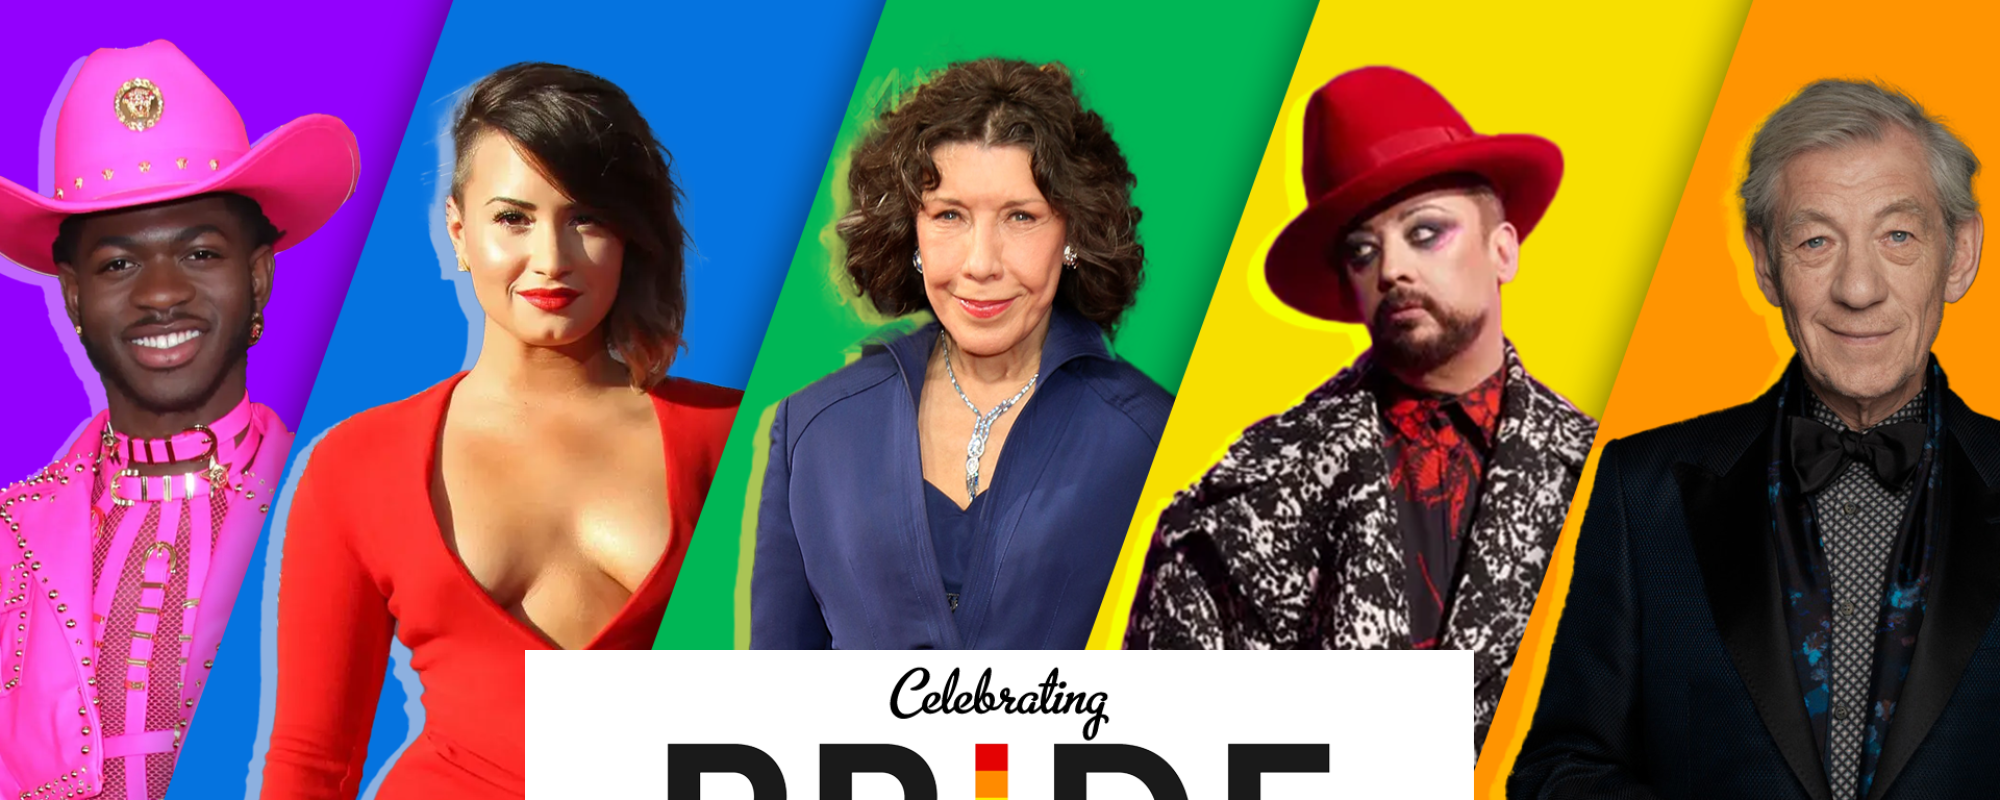 OVATION TV CELEBRATES LGBTQ PRIDE MONTH 2023 WITH WEEK-DAY MORNING LINEAR PROGRAMMING AND A CURATED ON-DEMAND LINEUP OF SERIES & FILMS